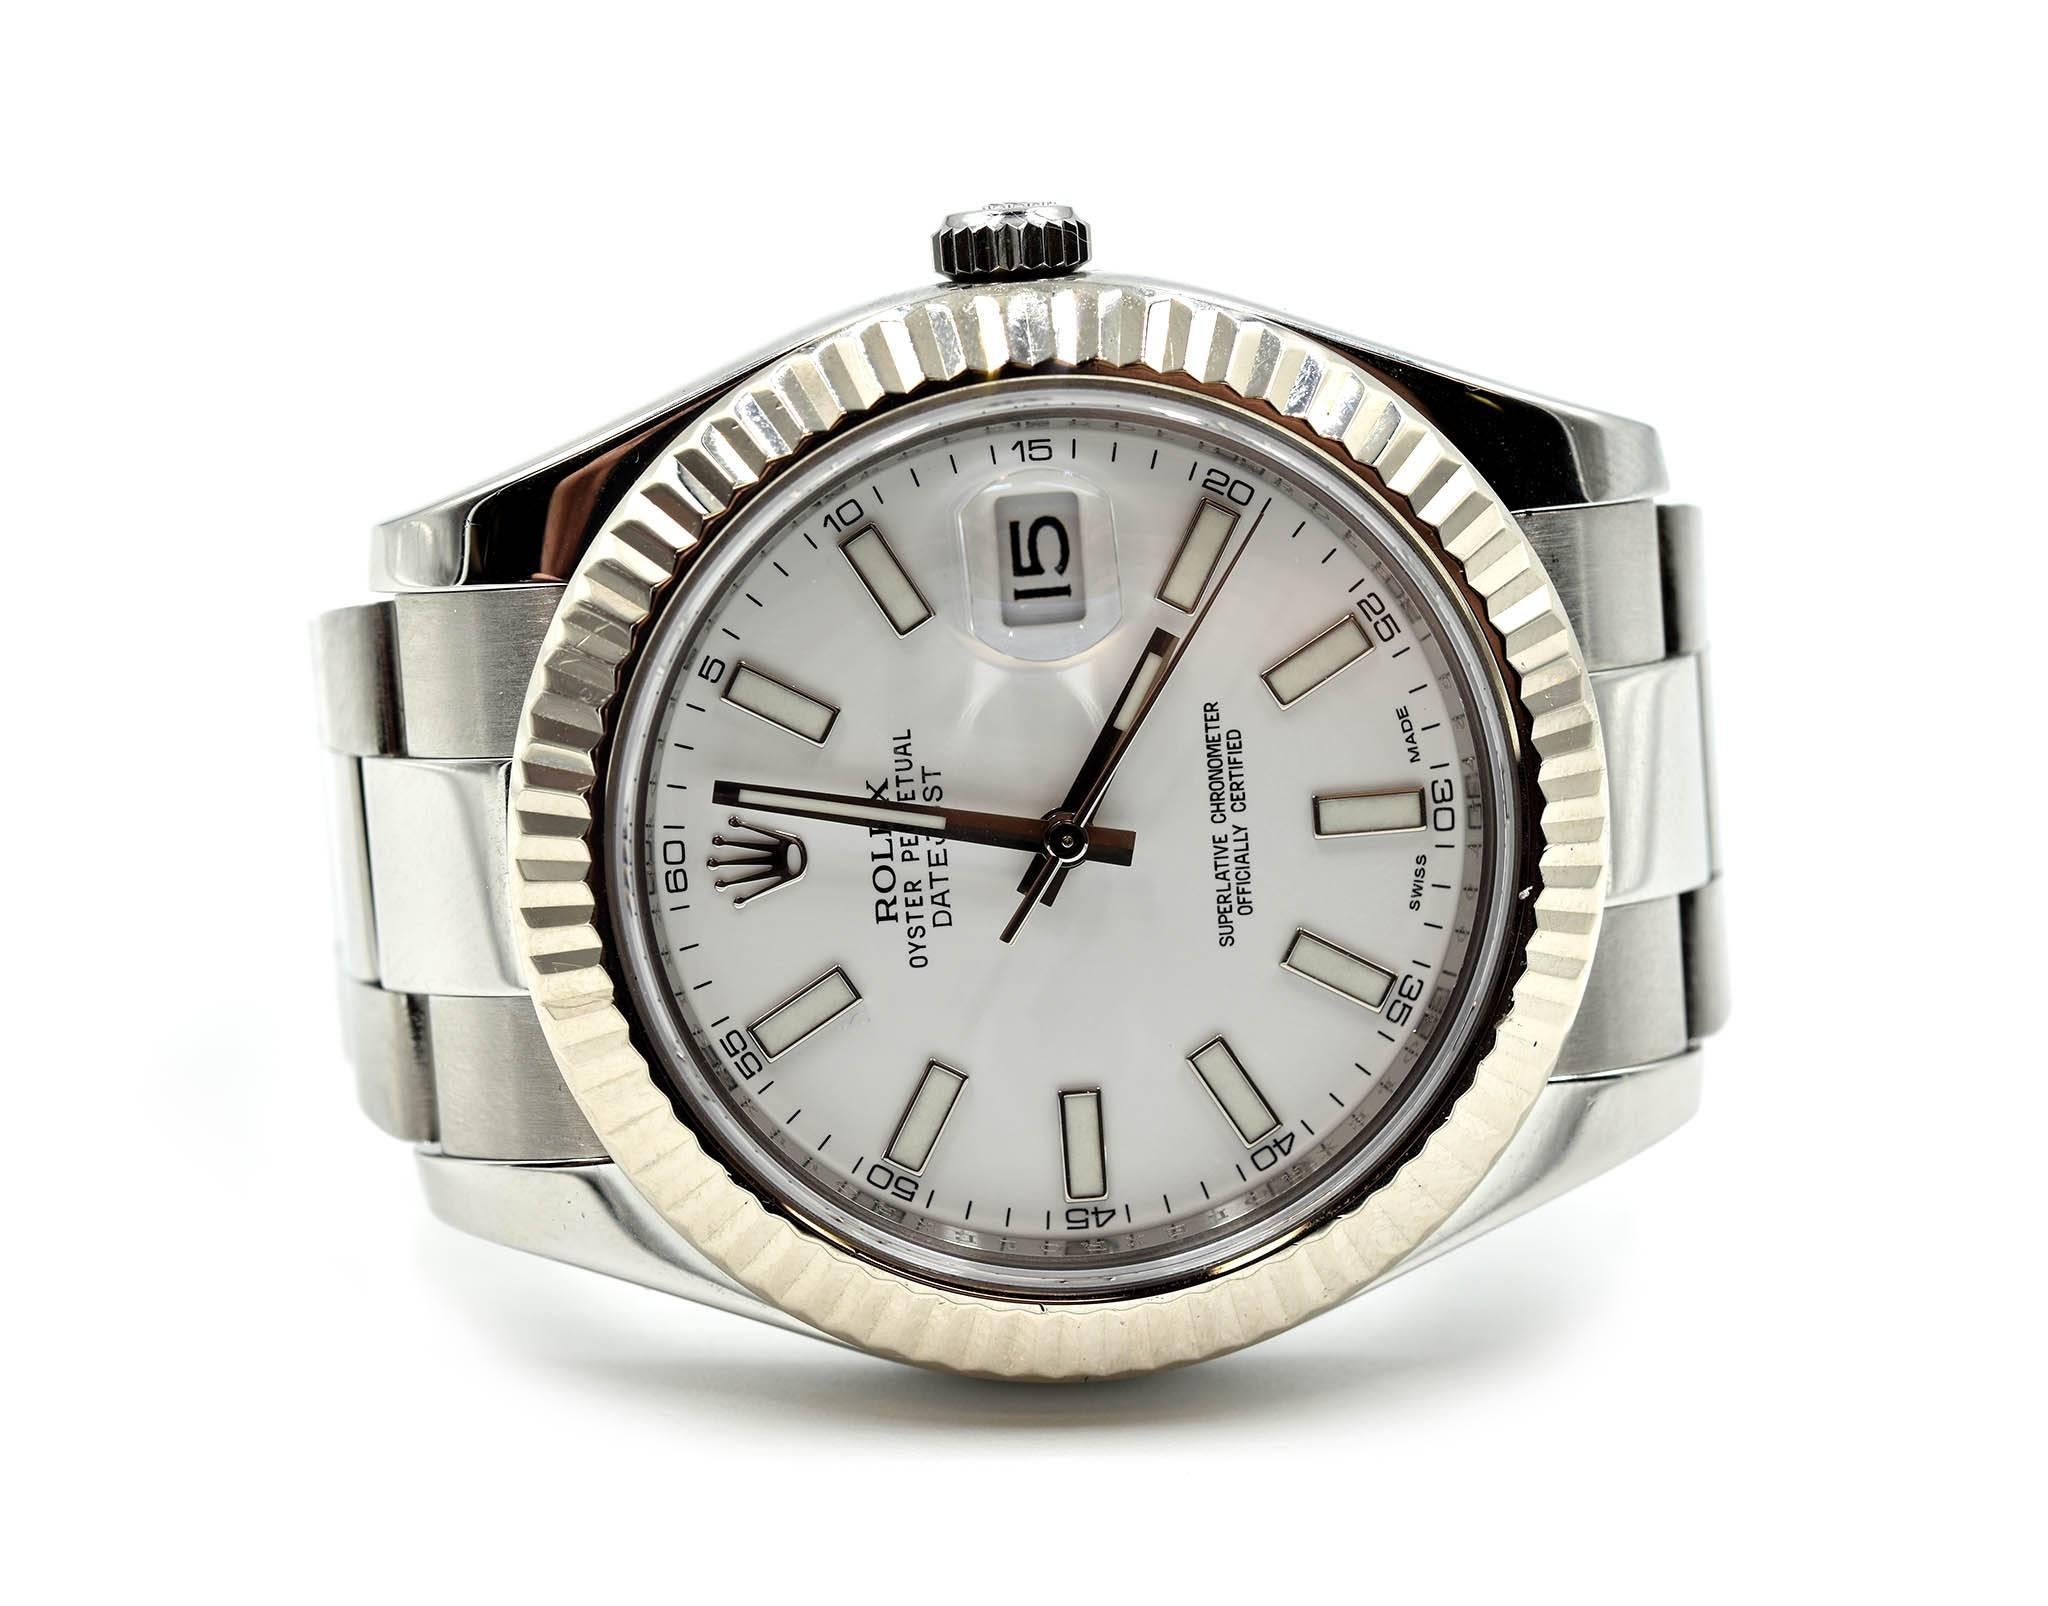 Movement: automatic
Function: hours, minutes, seconds, date
Case: round 41mm stainless steel case, 18k white gold fluted bezel, stainless steel screw-down crown, waterproof to 100 meters
Band: stainless steel oyster bracelet with diver’s